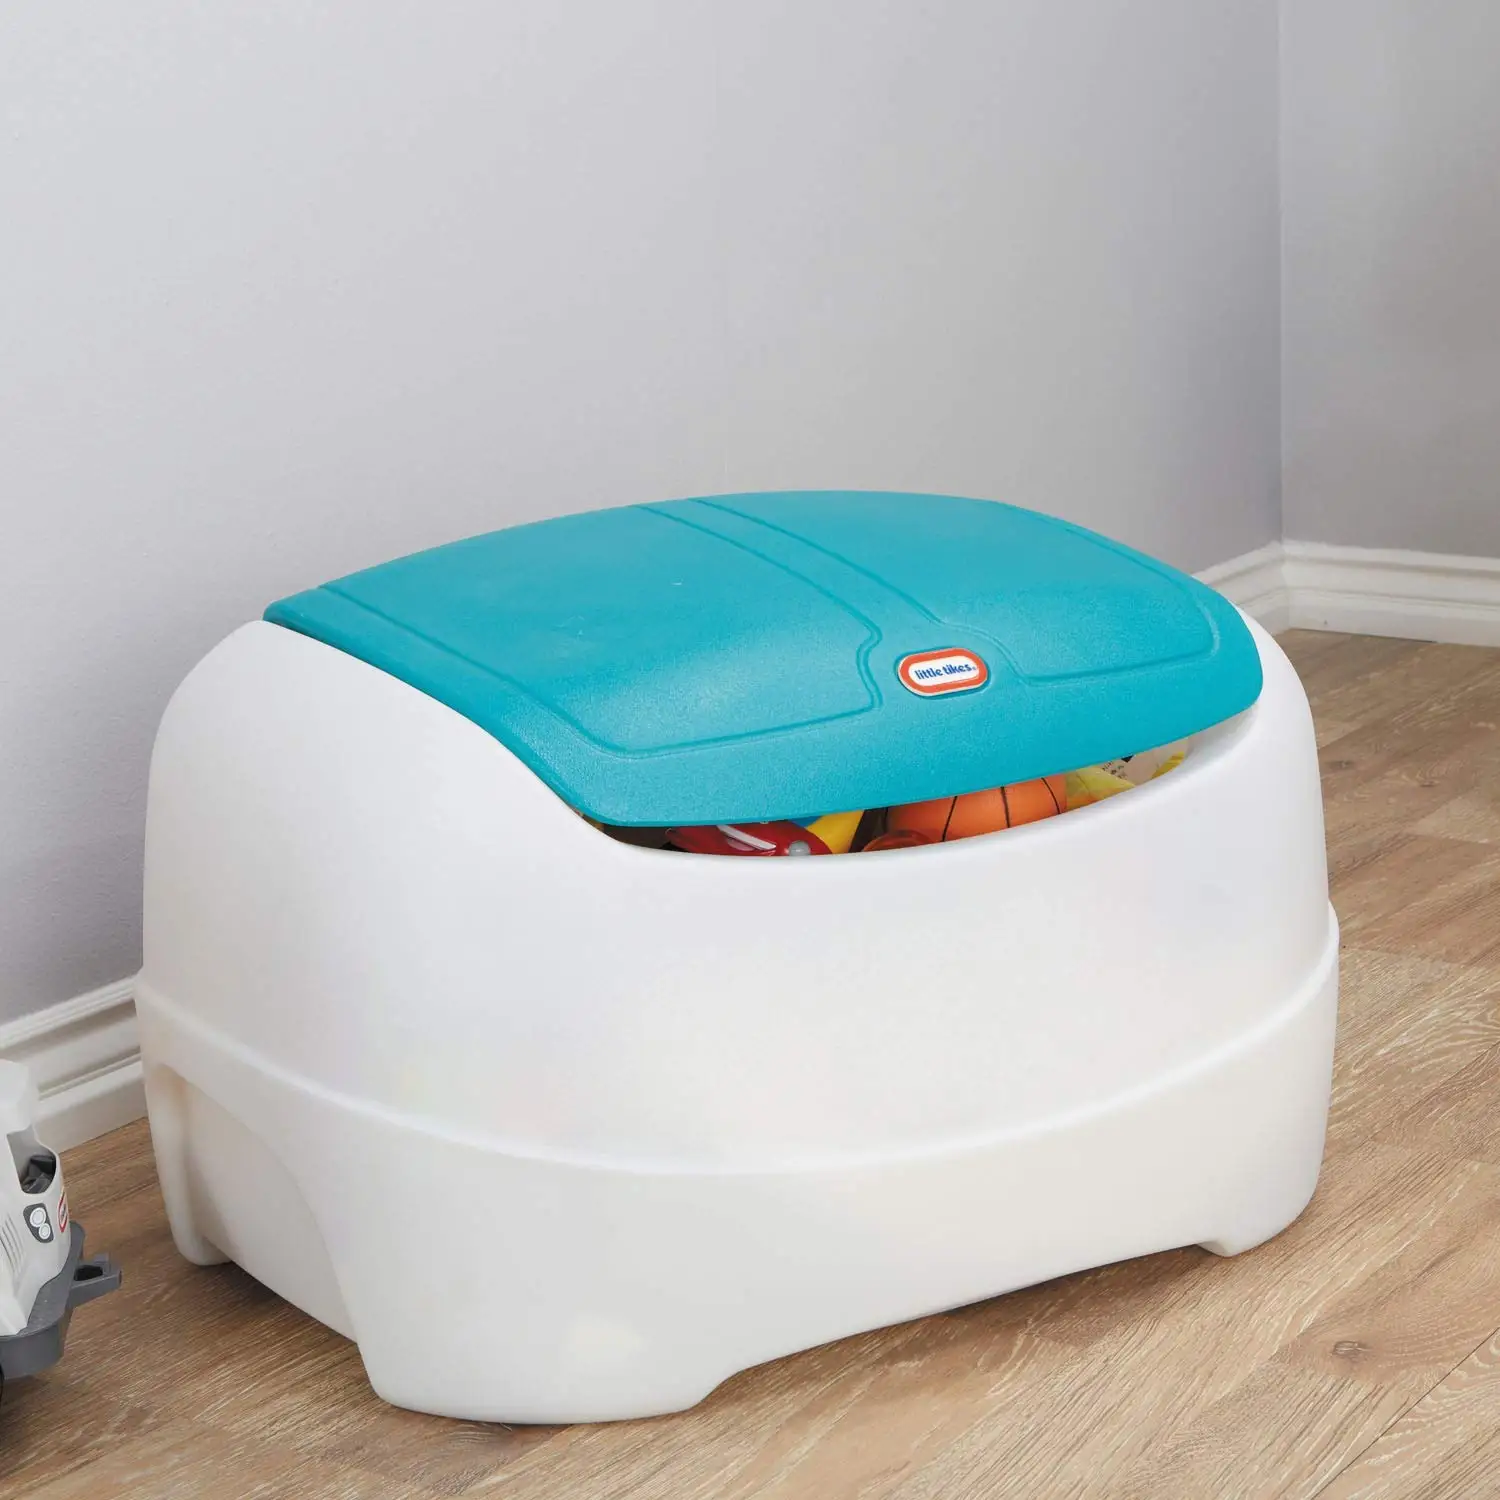 

Spacious Toy Box: Large Interior, Lightweight Detachable Lid for Safety, No Assembly Required, Easy Cleaning with Damp Cloth